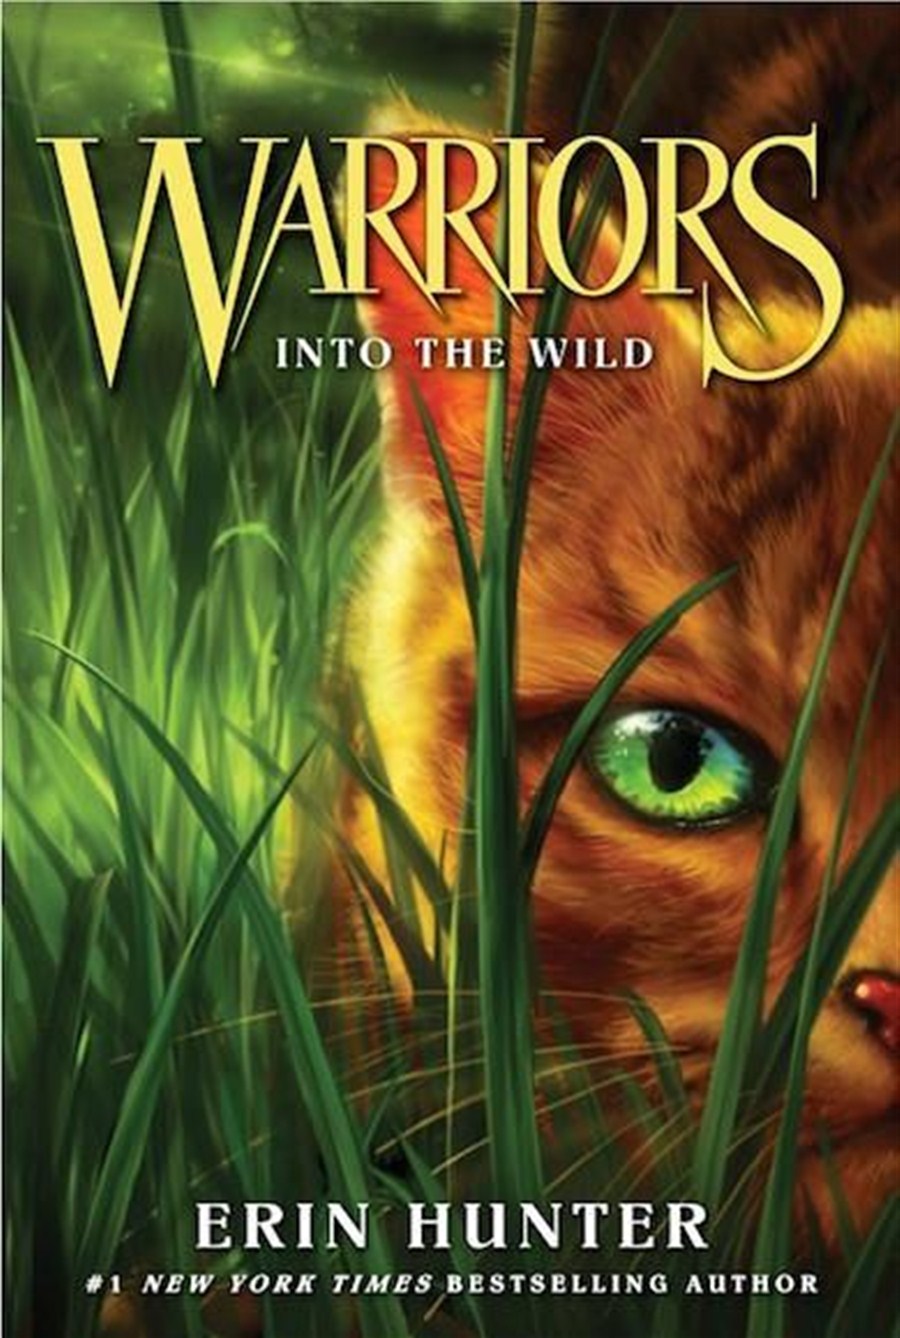 Alibaba Pictures secures film rights to book series 'Warriors', News